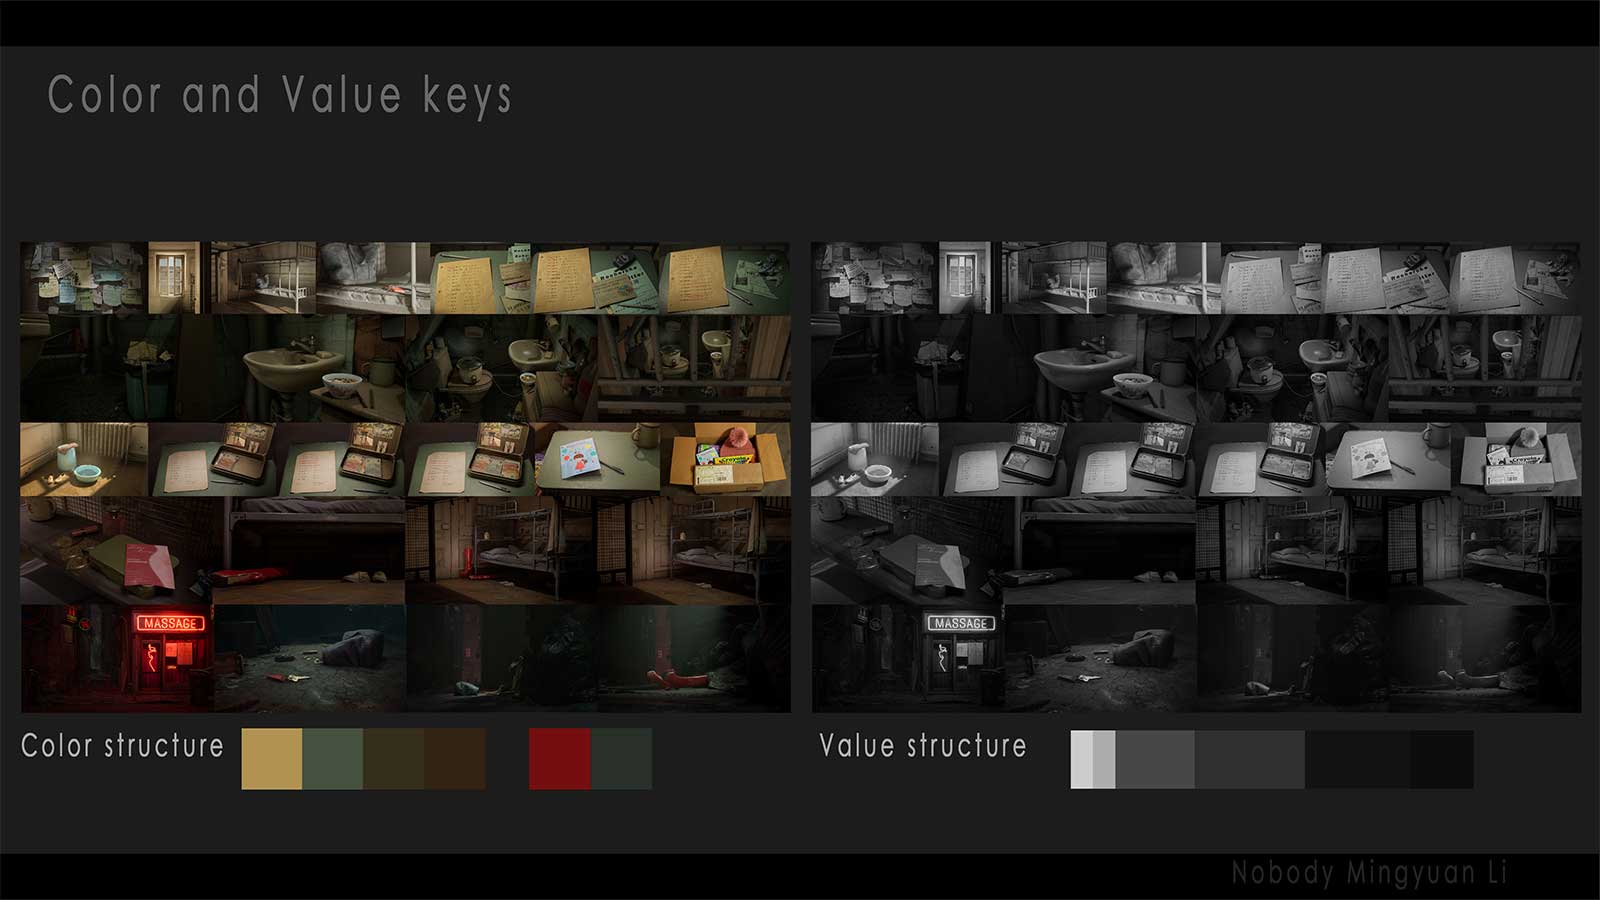 A breakdown of color choice in different shots.